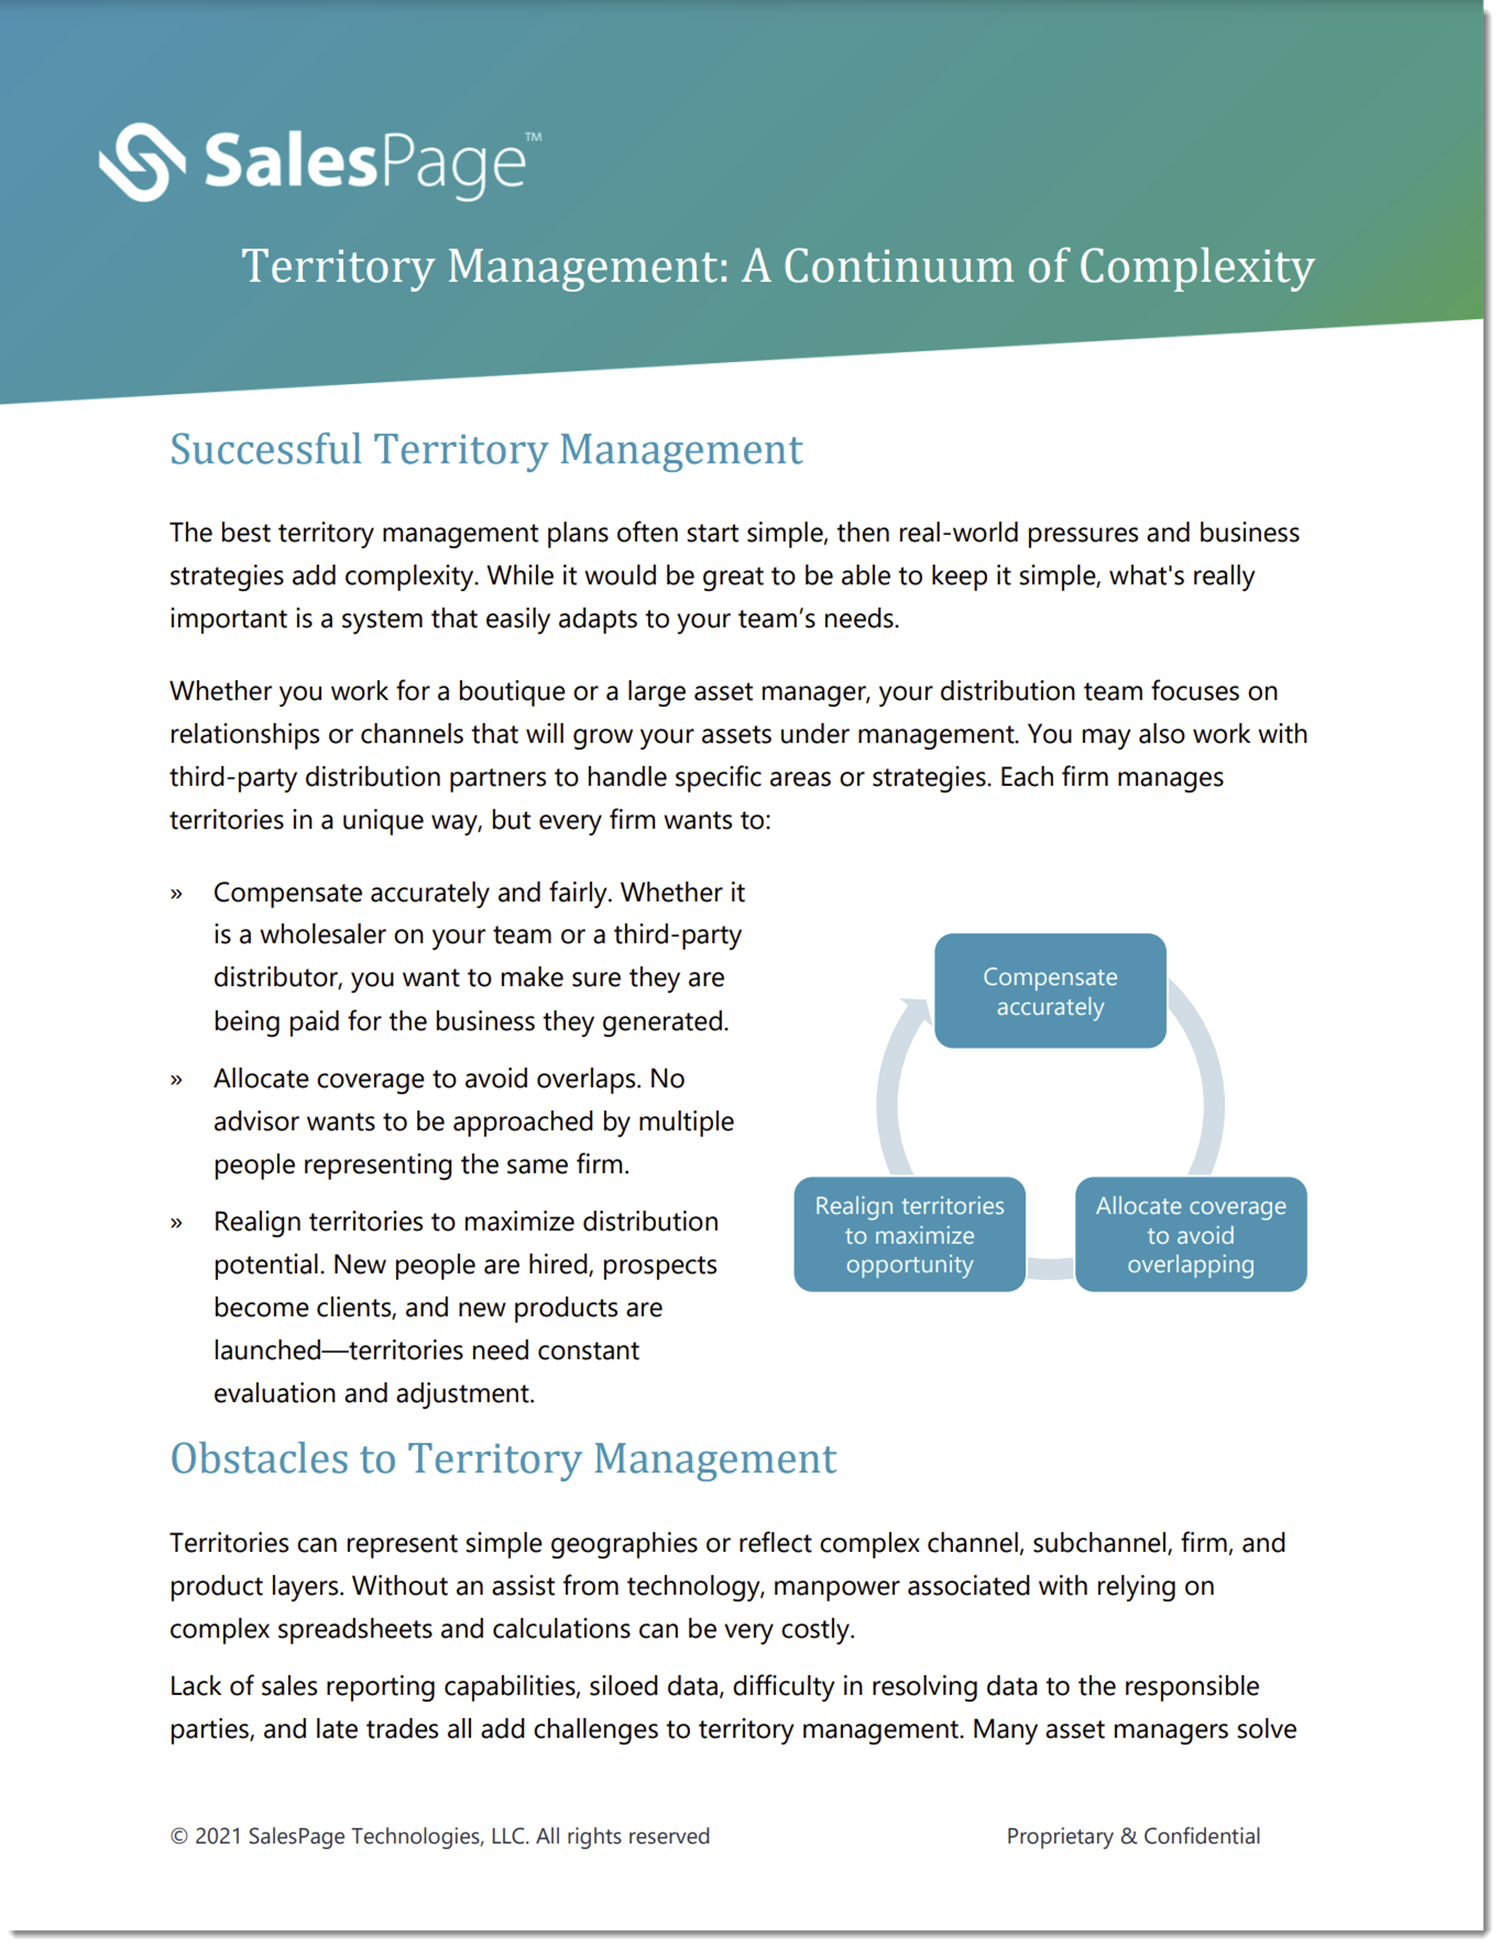 Asset managers guide to territory management